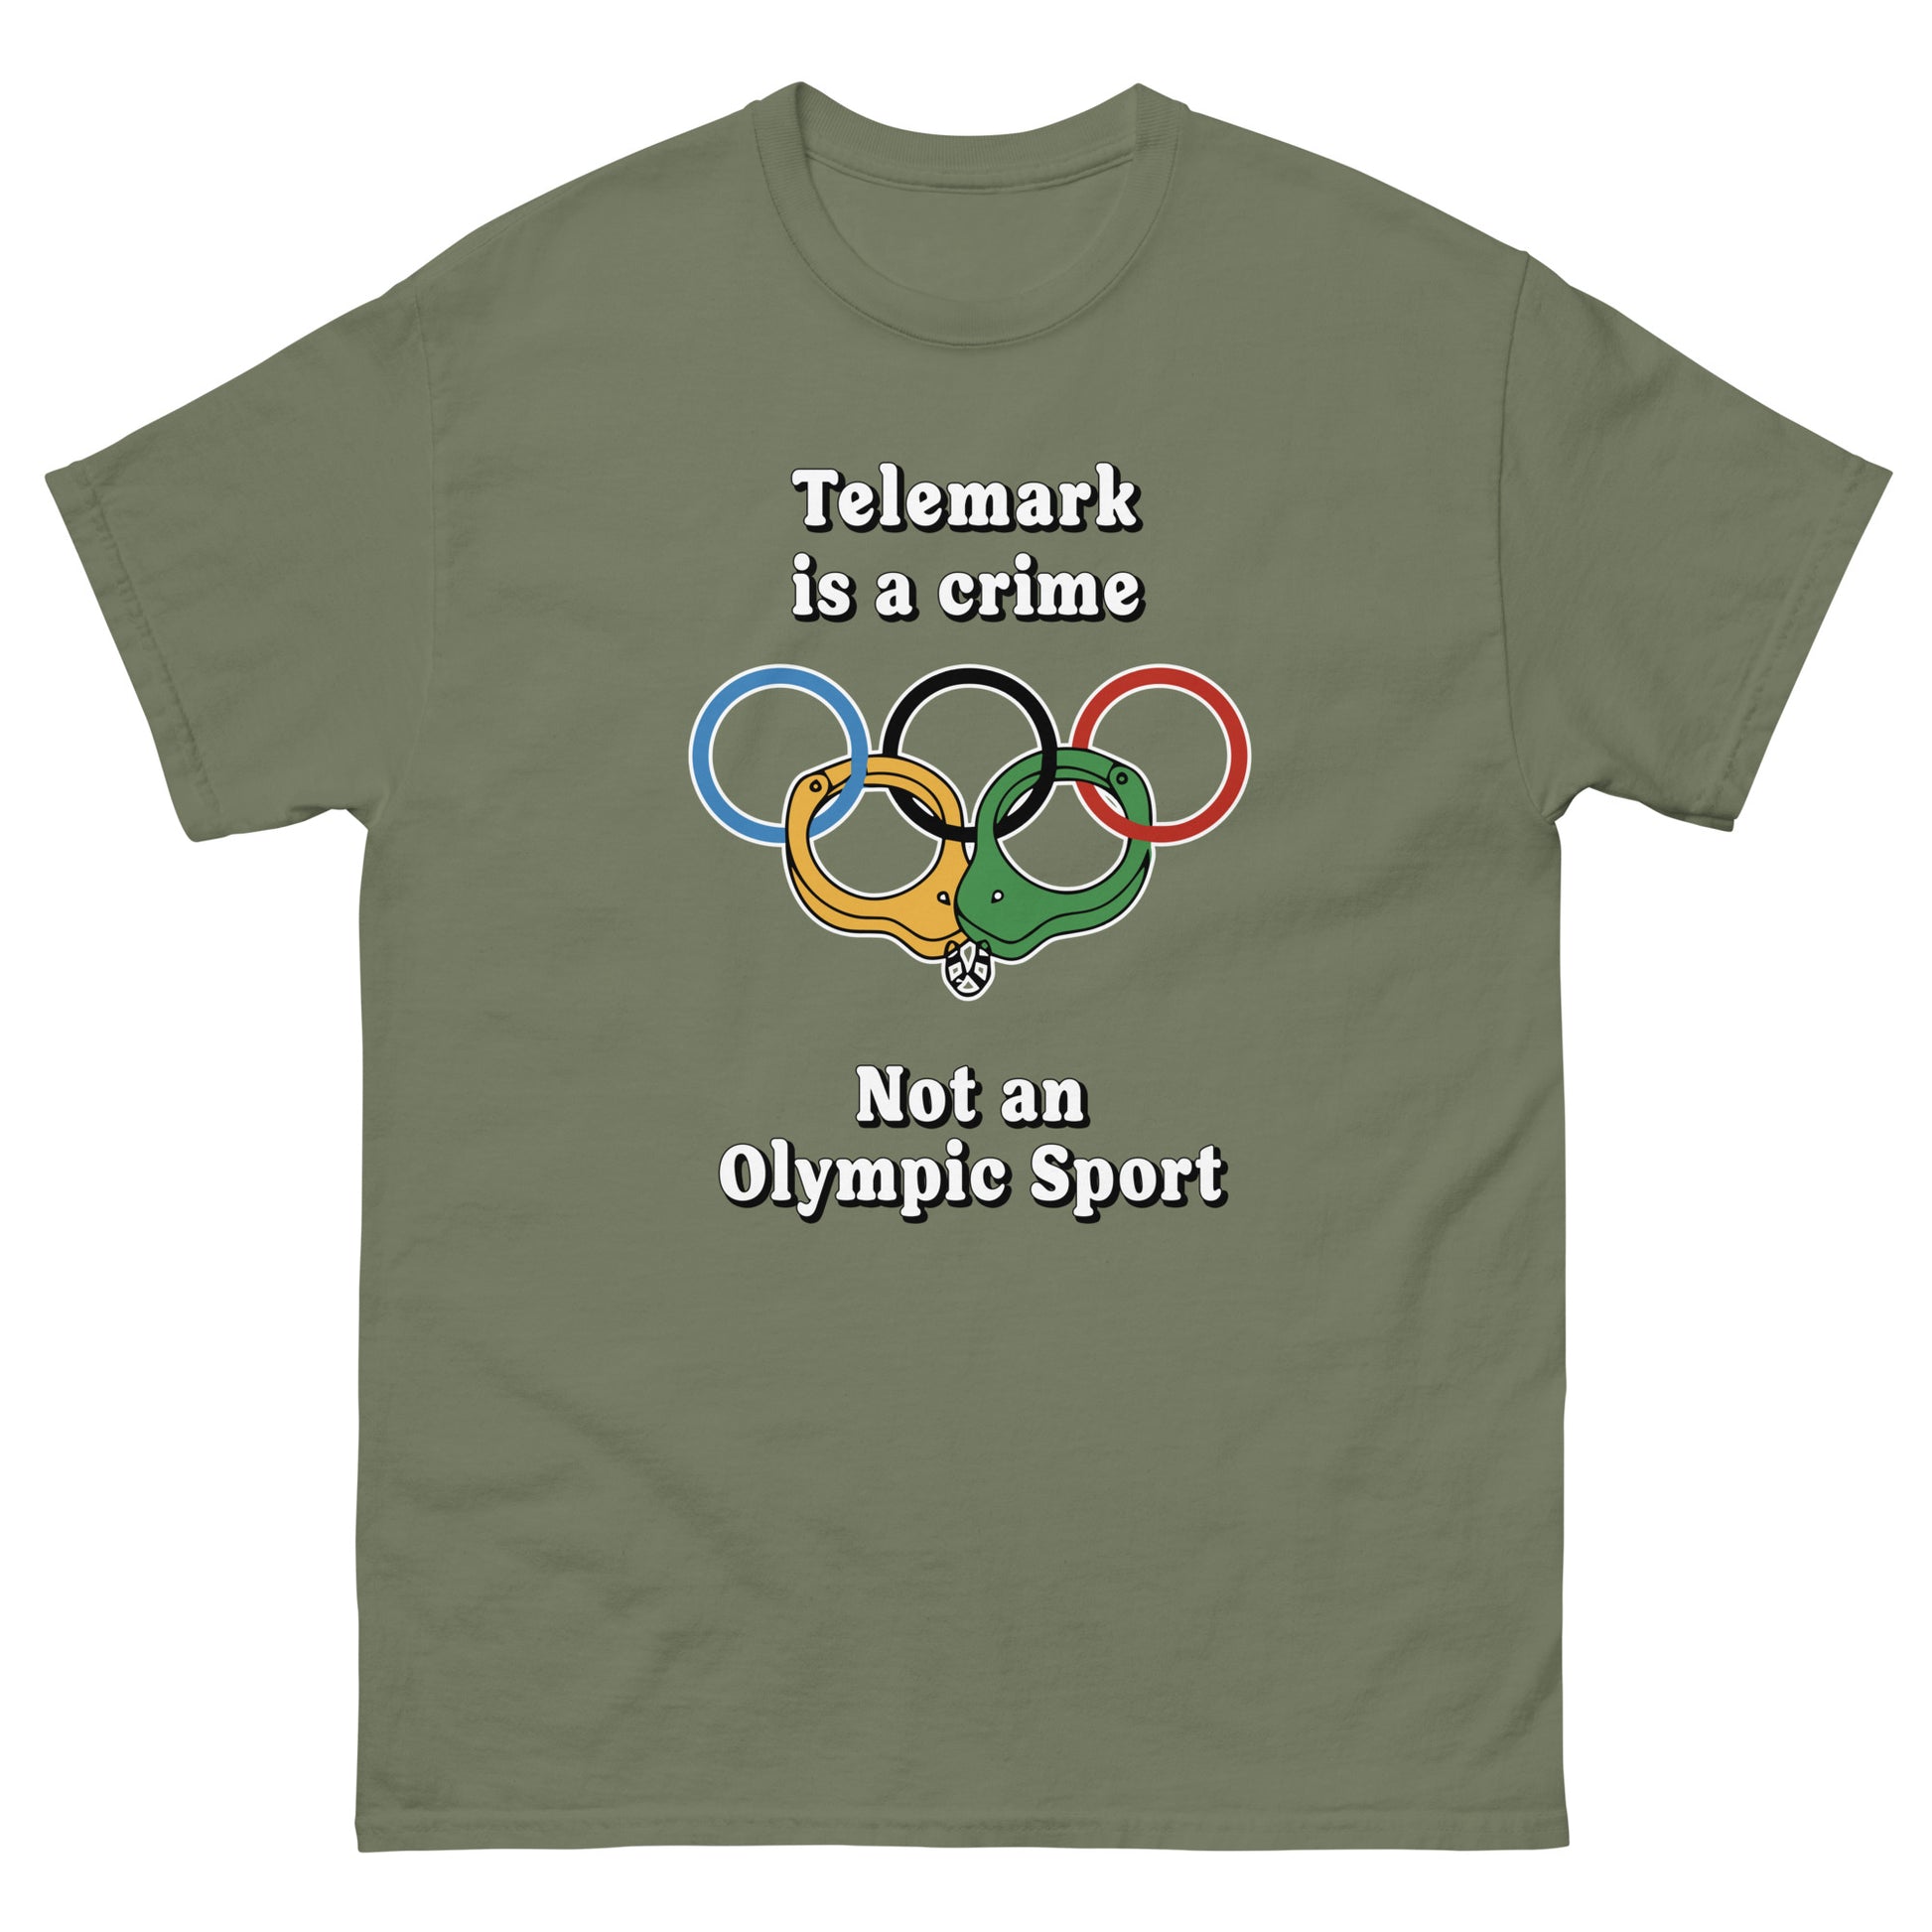 Telemark is a crime not an olympic sport design printed by Whistler Shirts